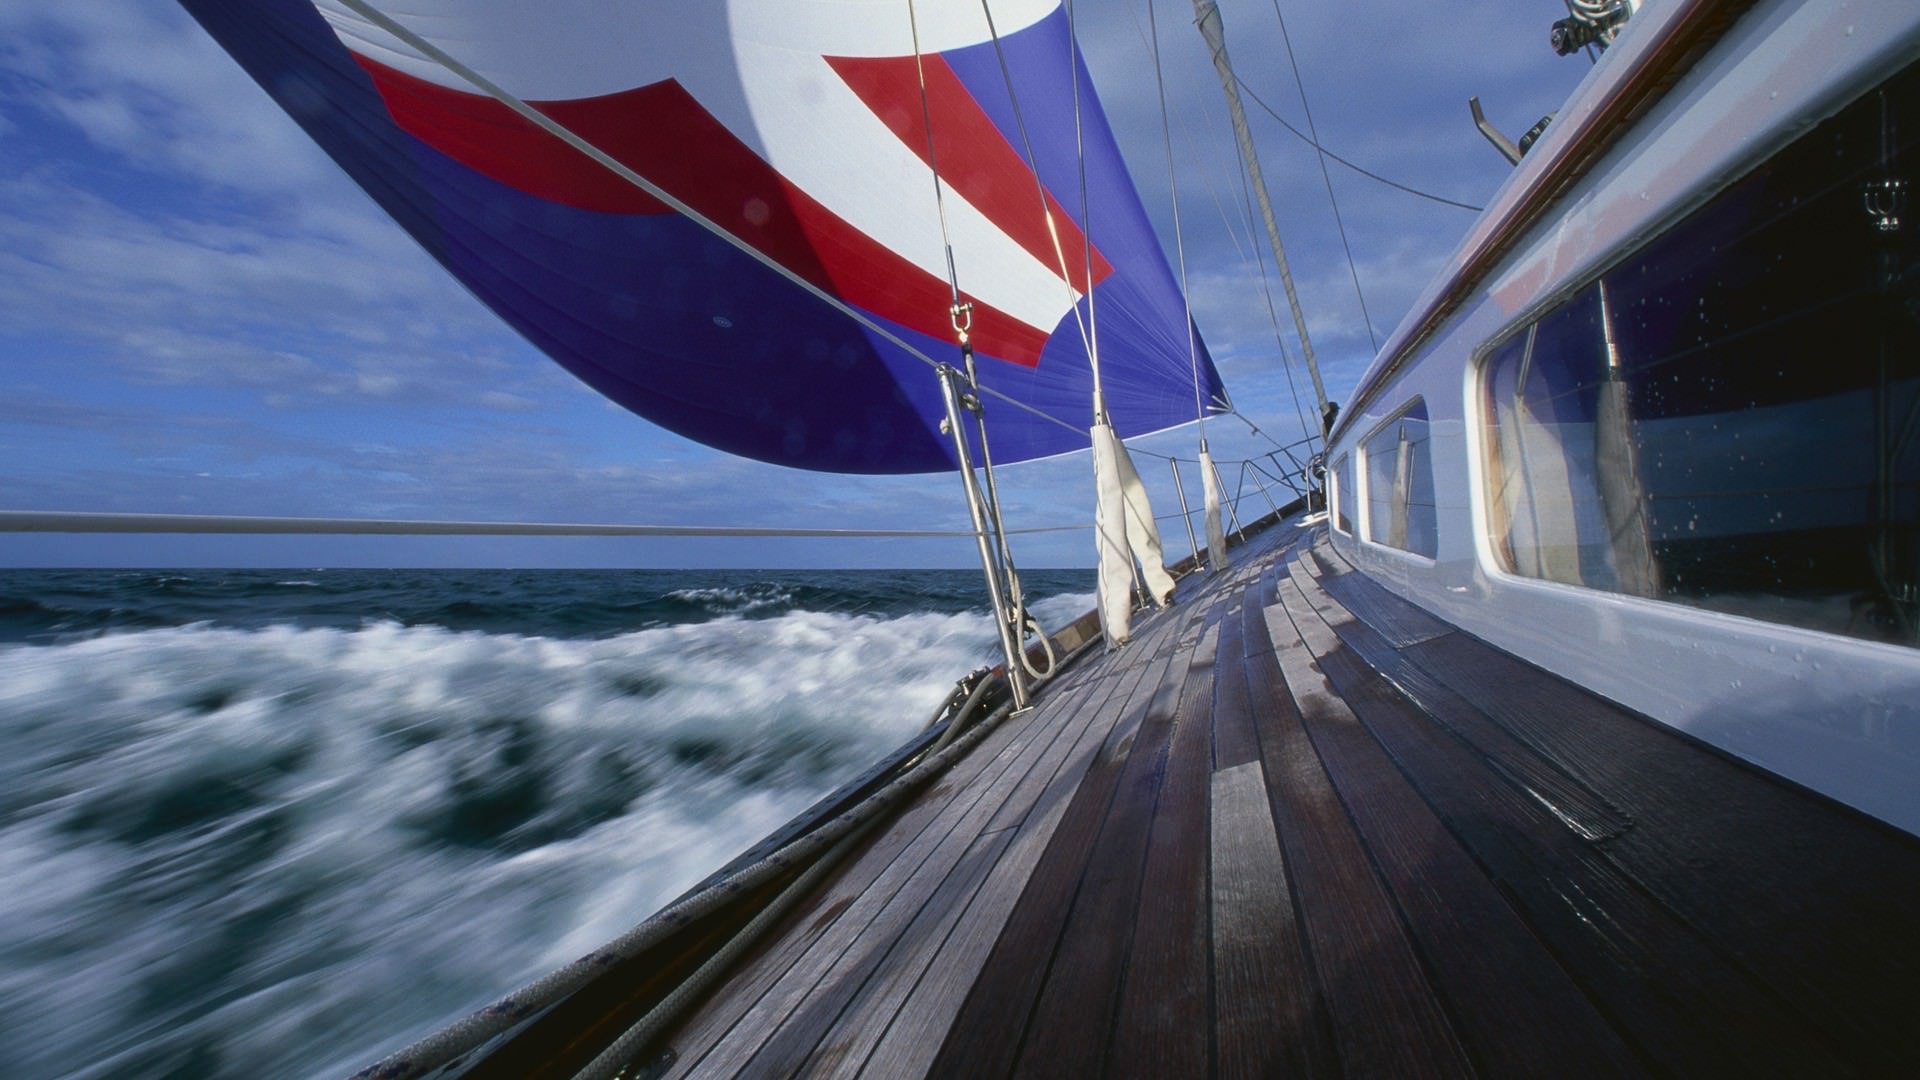 21+ Sailing Wallpapers, Backgrounds, Images | FreeCreatives